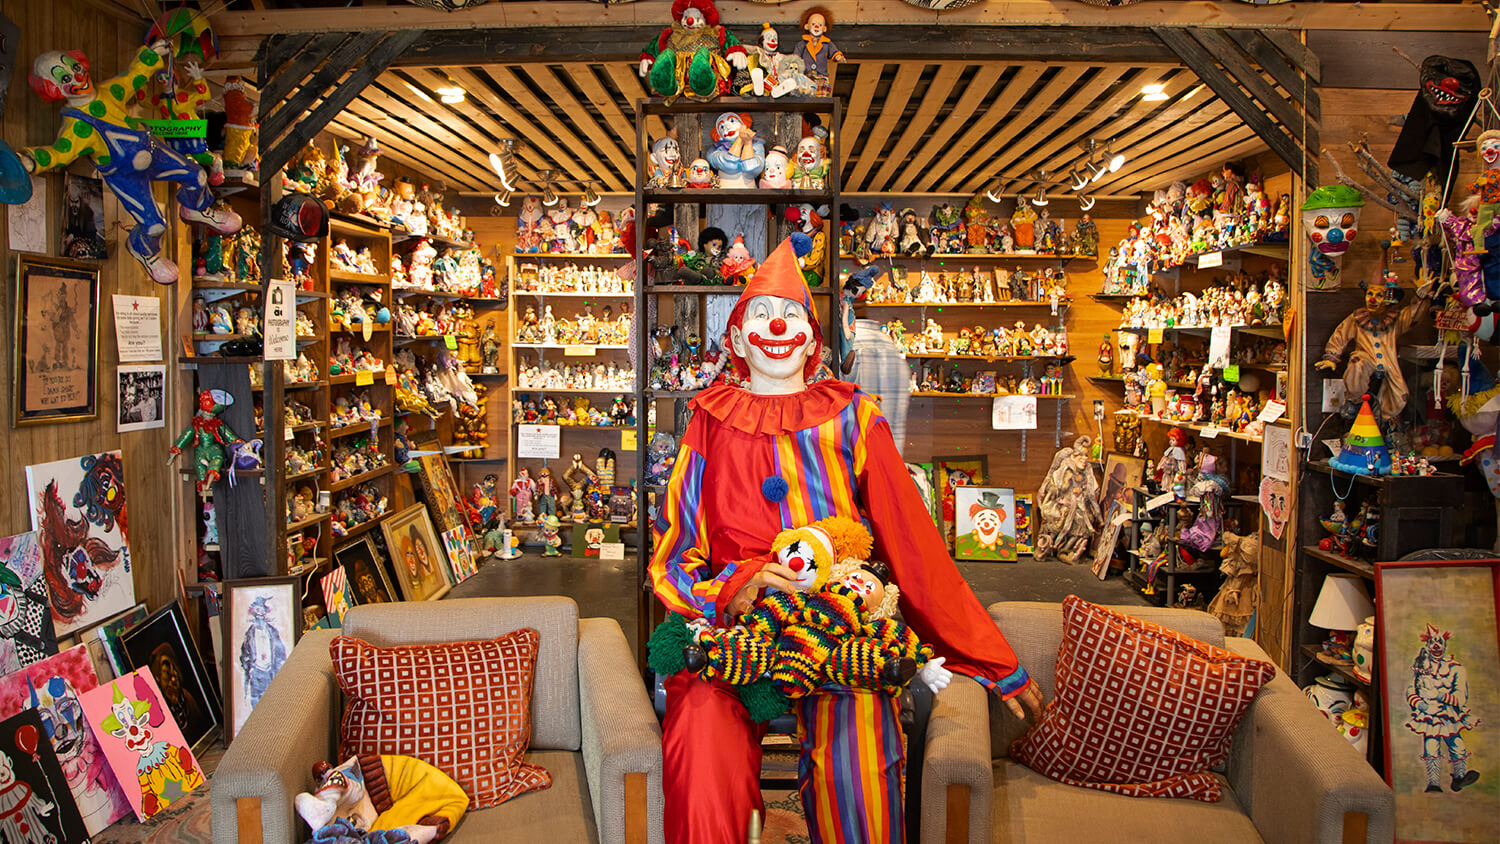 Q&A with the Ringleader of the World Famous Clown Motel